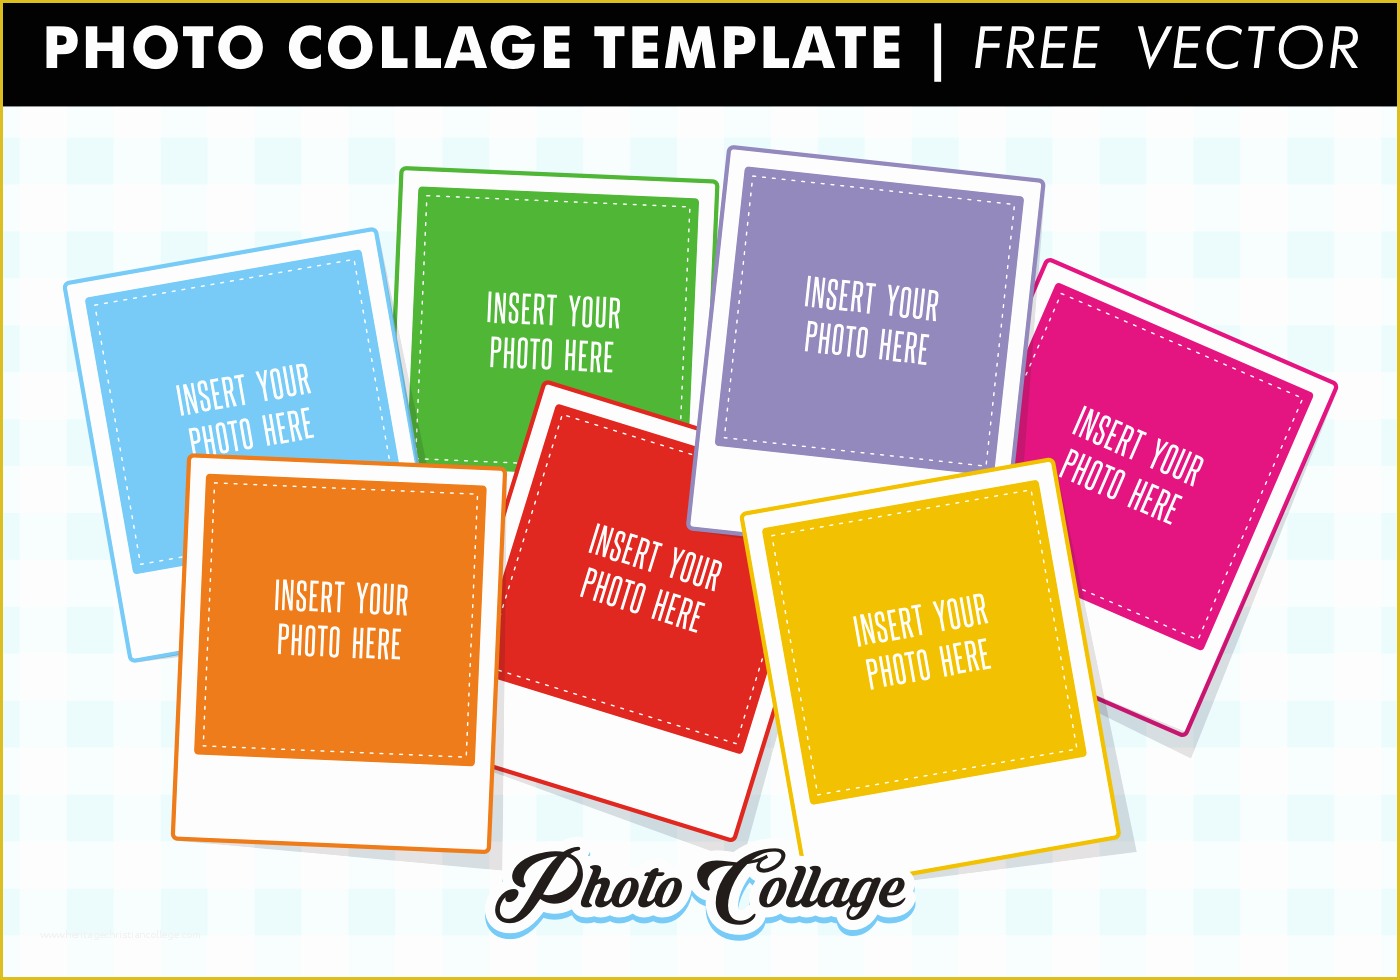 Free Photo Collage Templates Of Collage Templates Free Vector Download Free Vector